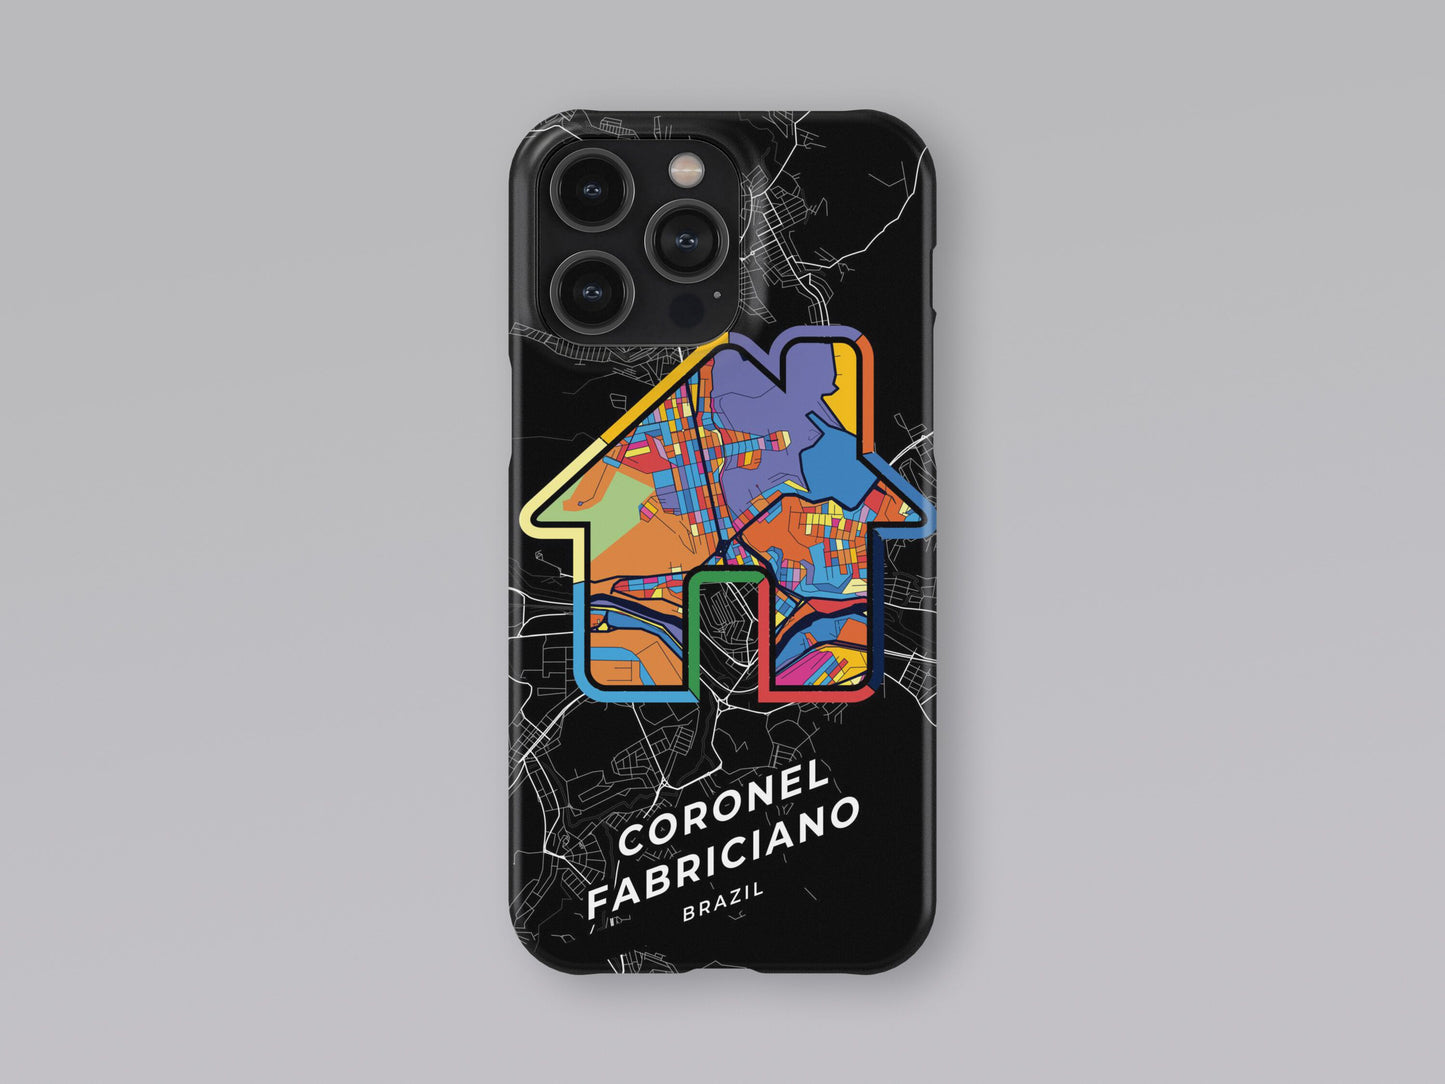 Coronel Fabriciano Brazil slim phone case with colorful icon. Birthday, wedding or housewarming gift. Couple match cases. 3